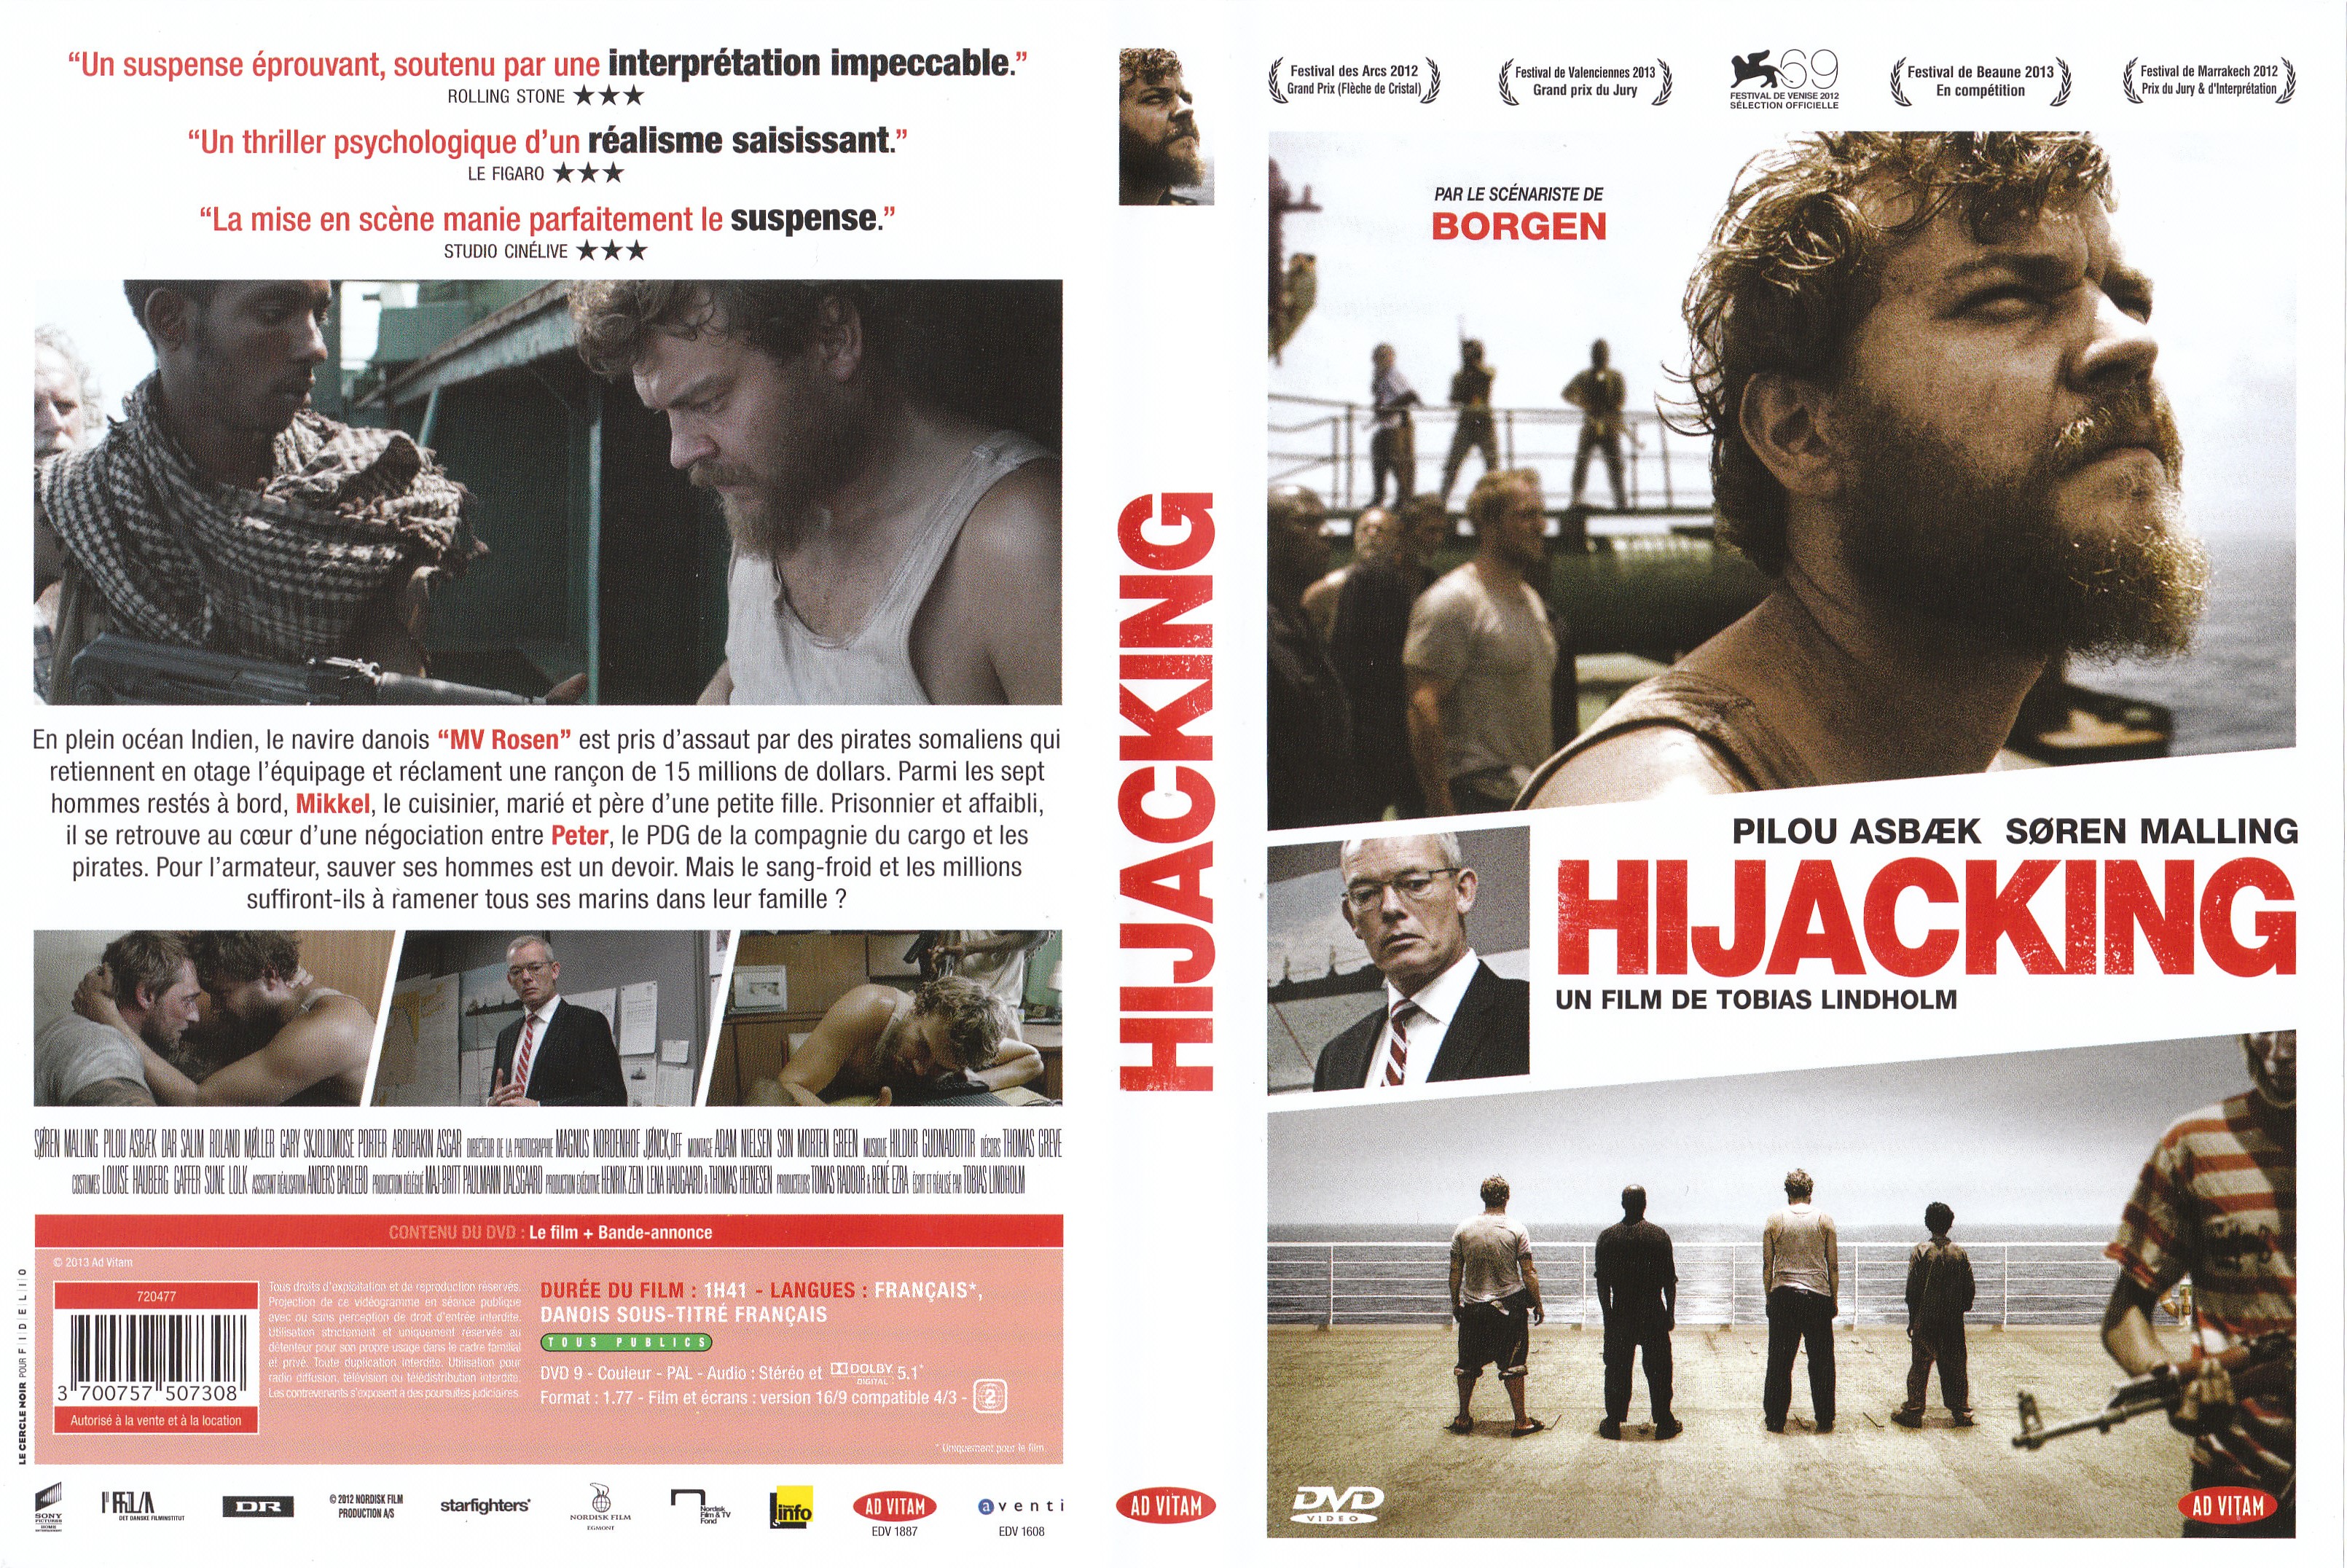 Jaquette DVD Hijacking